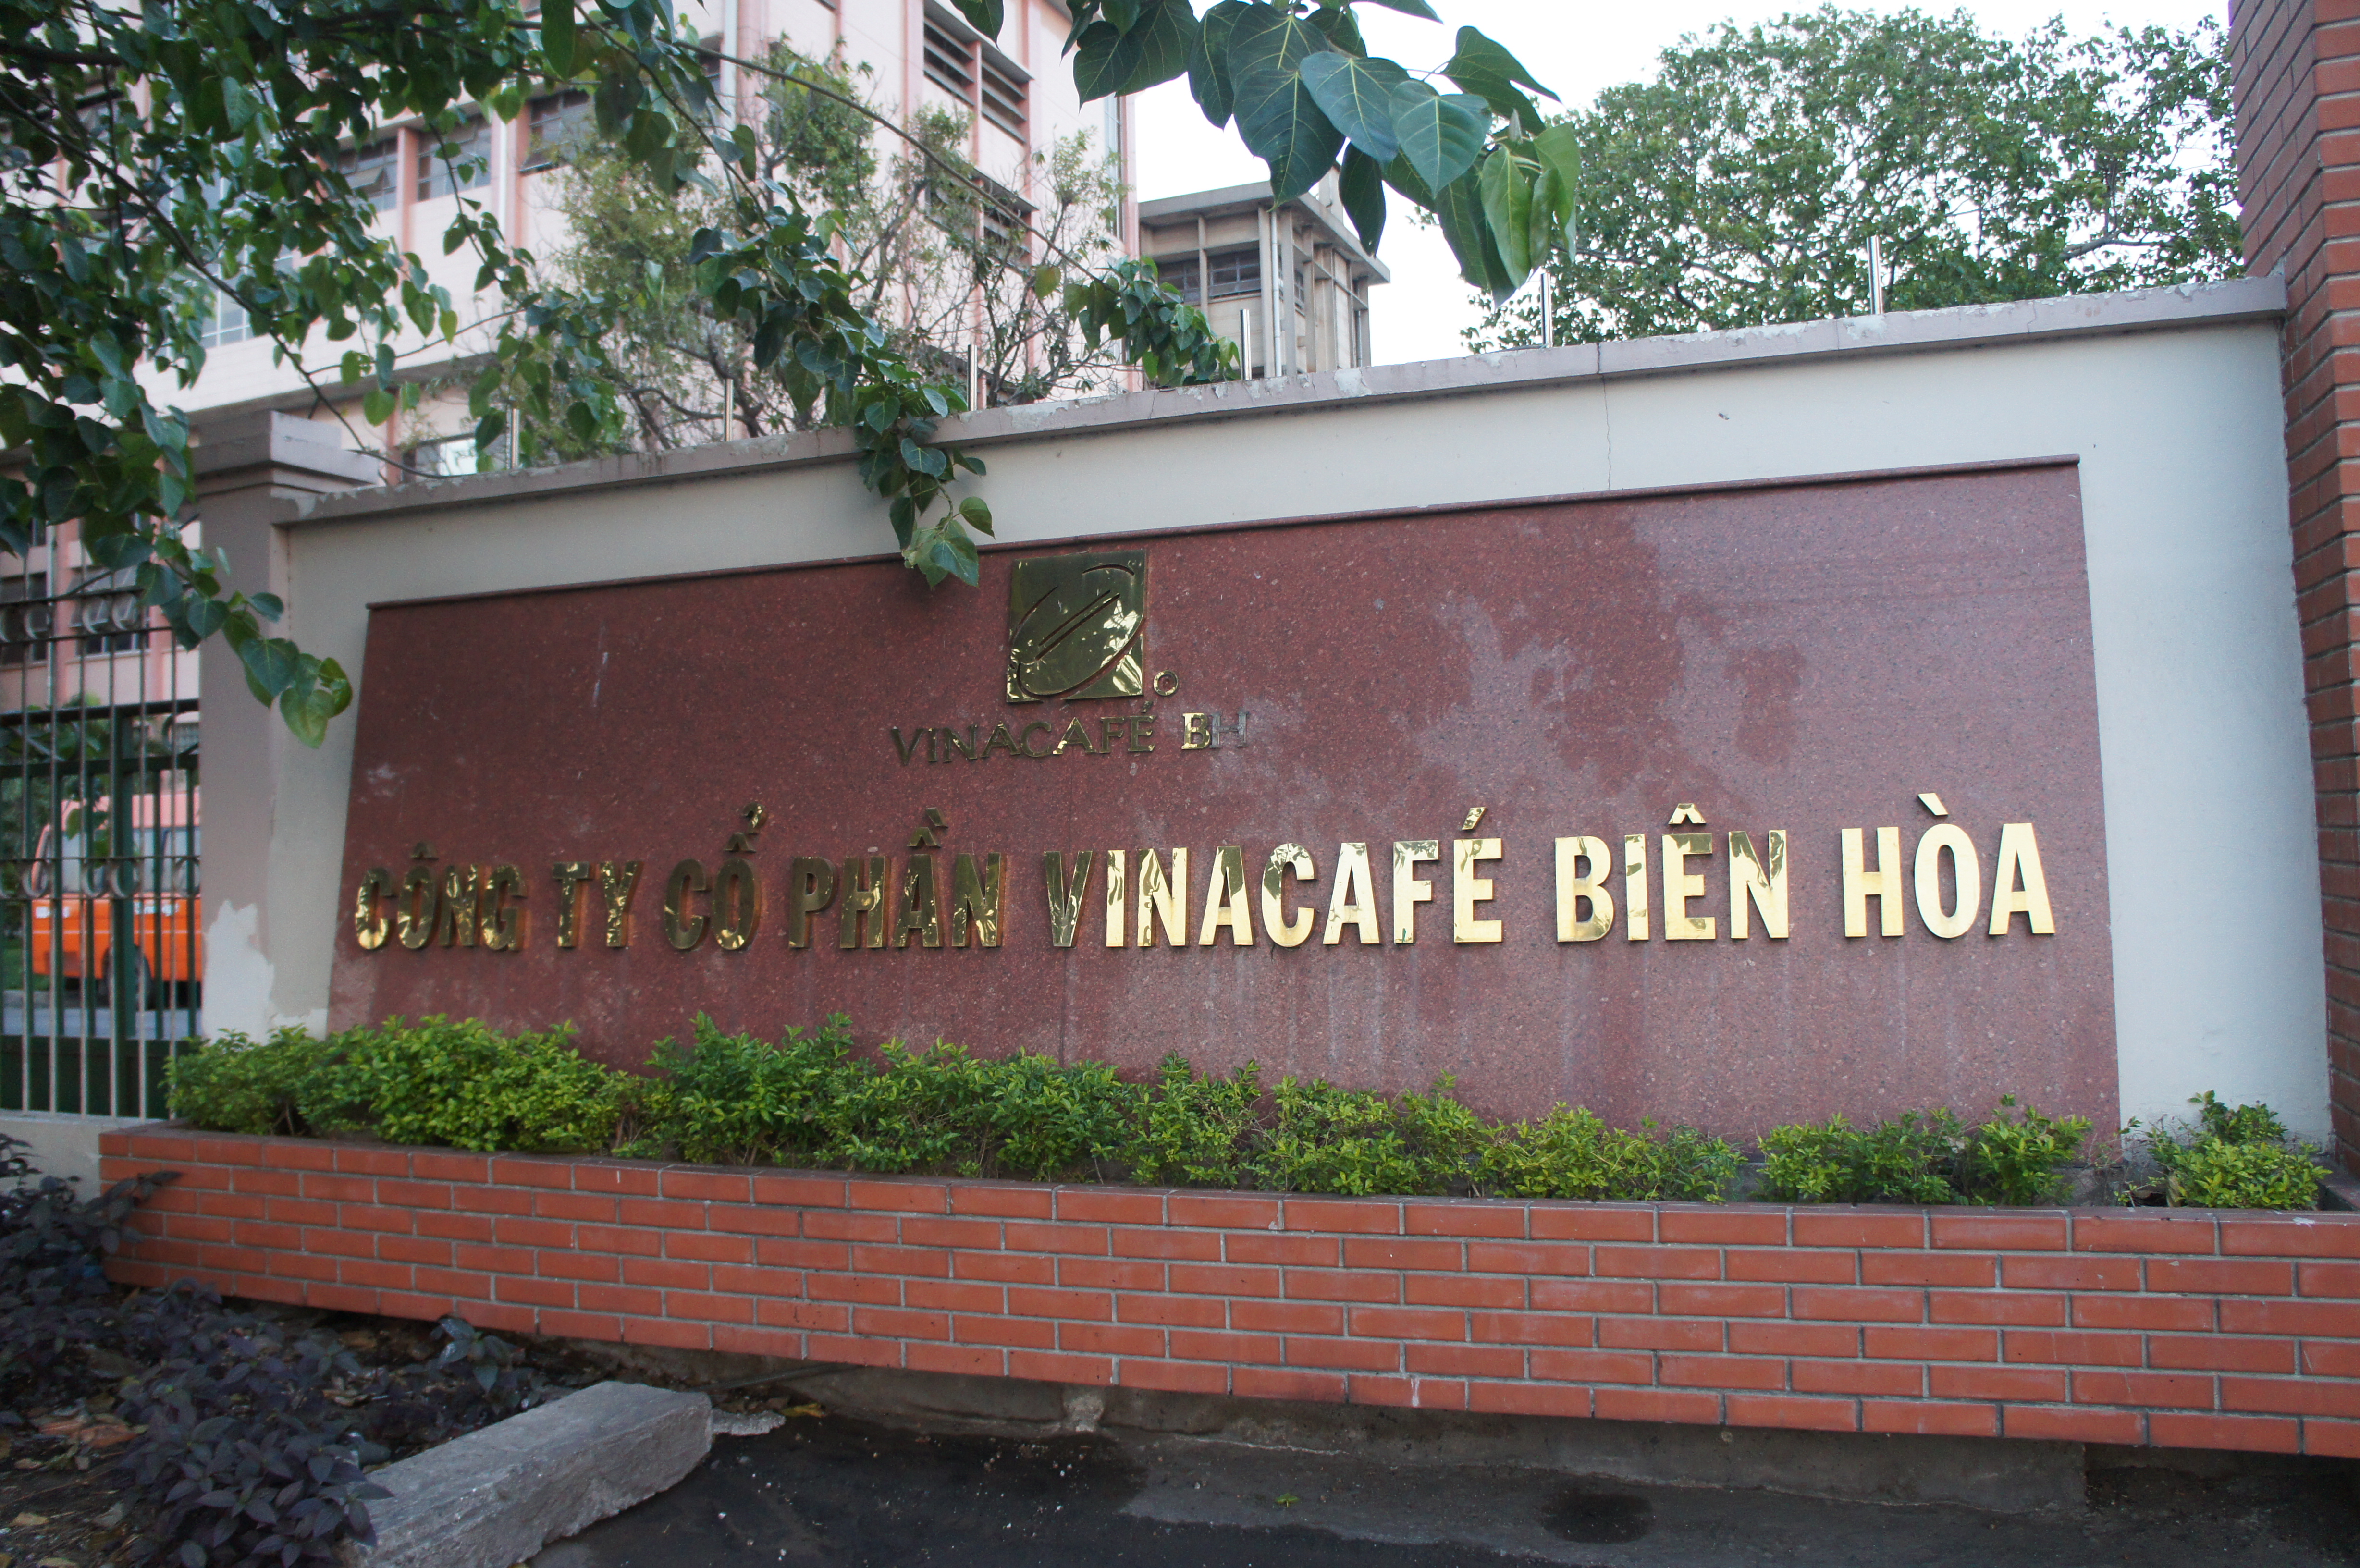 Masan to fully acquire Vinacafe Bien Hoa